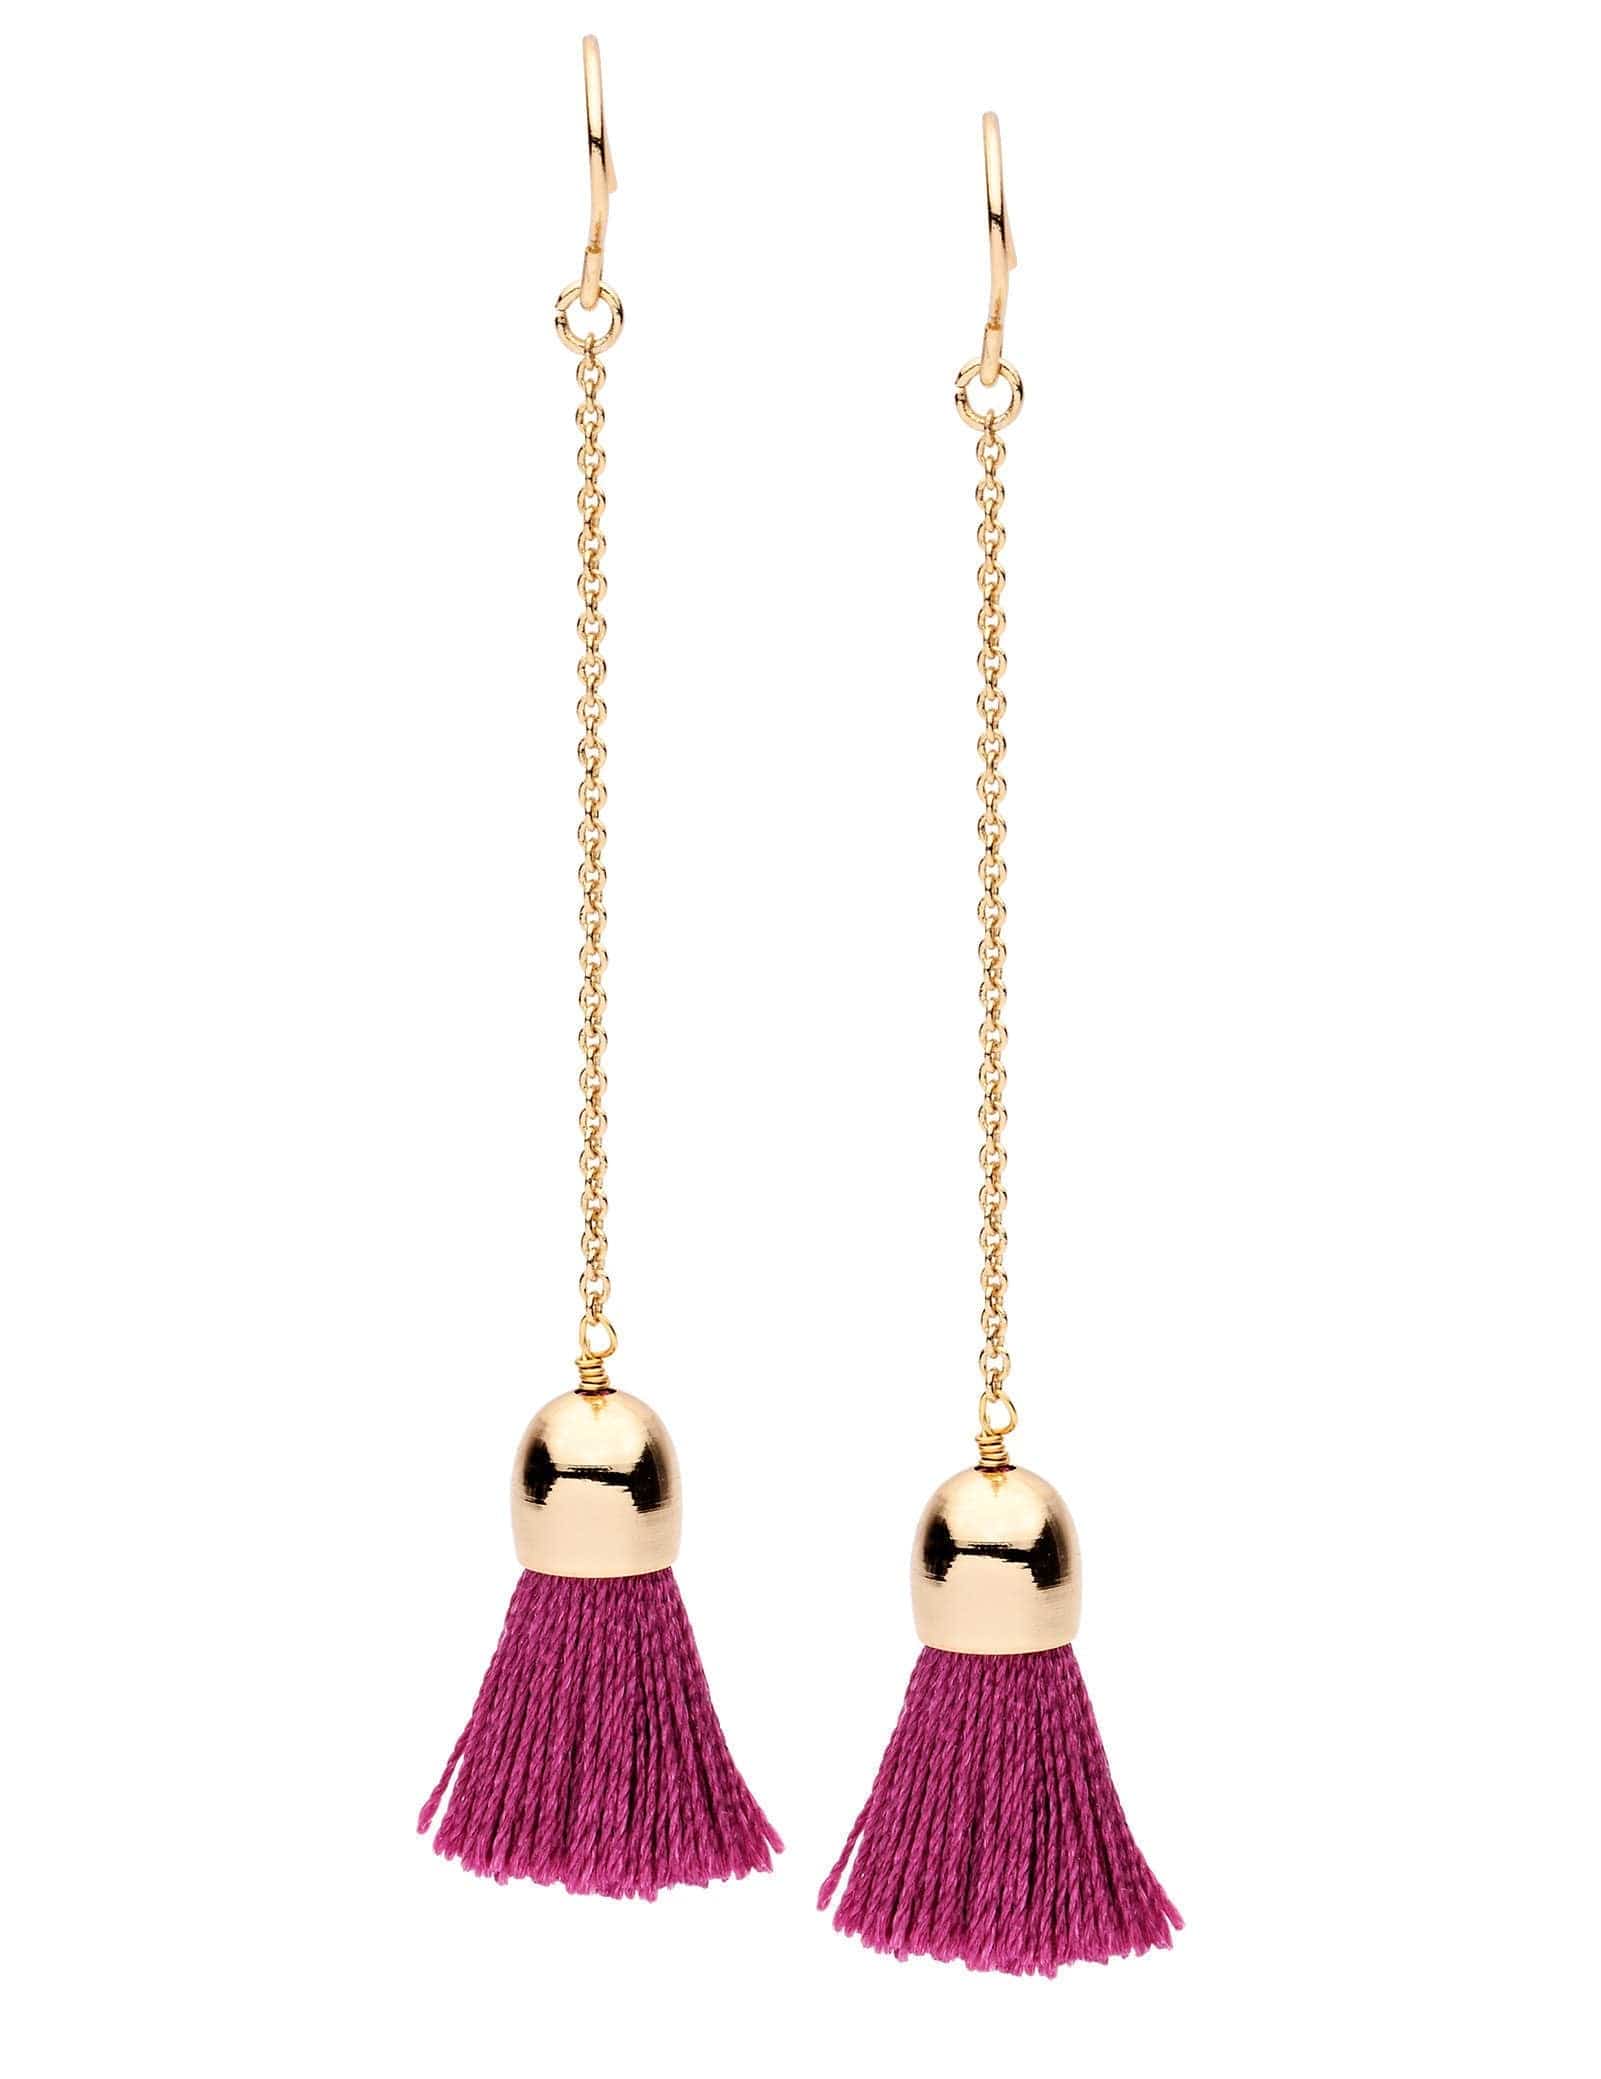 Dear Addison Yellow Gold / Pink Candytuft Earrings